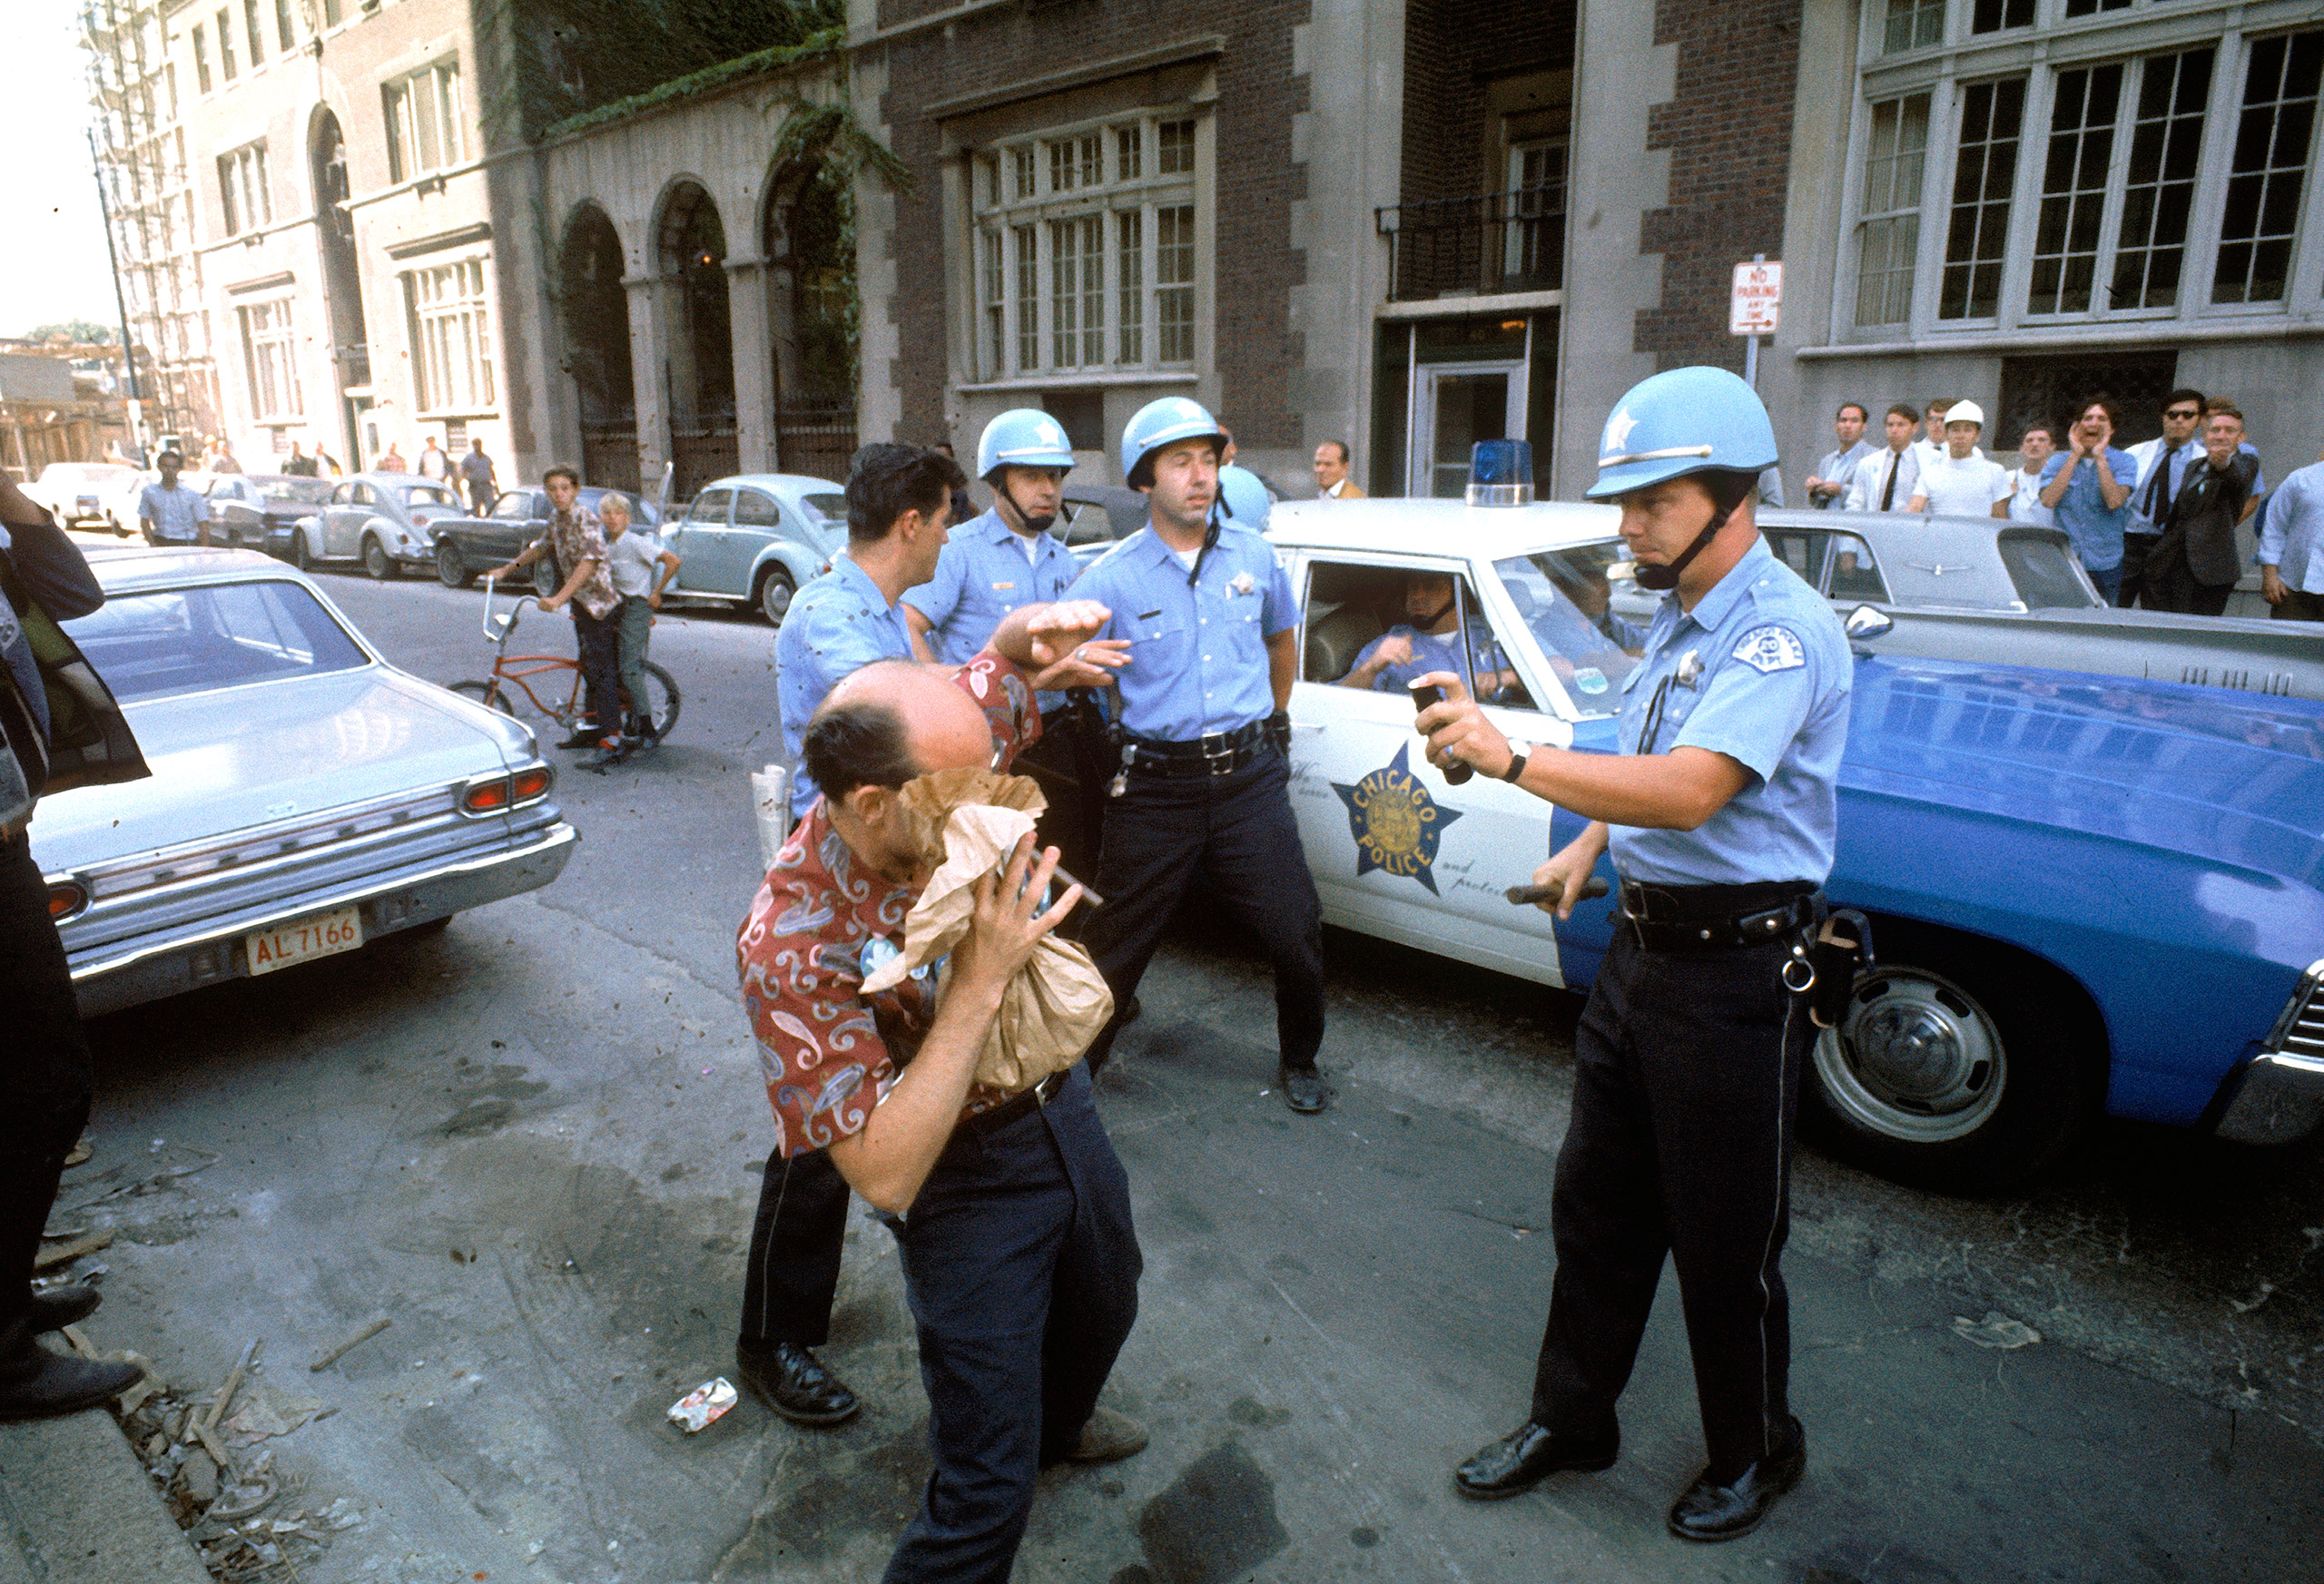 Police macing a protester during the 1968 Democratic National Convention.